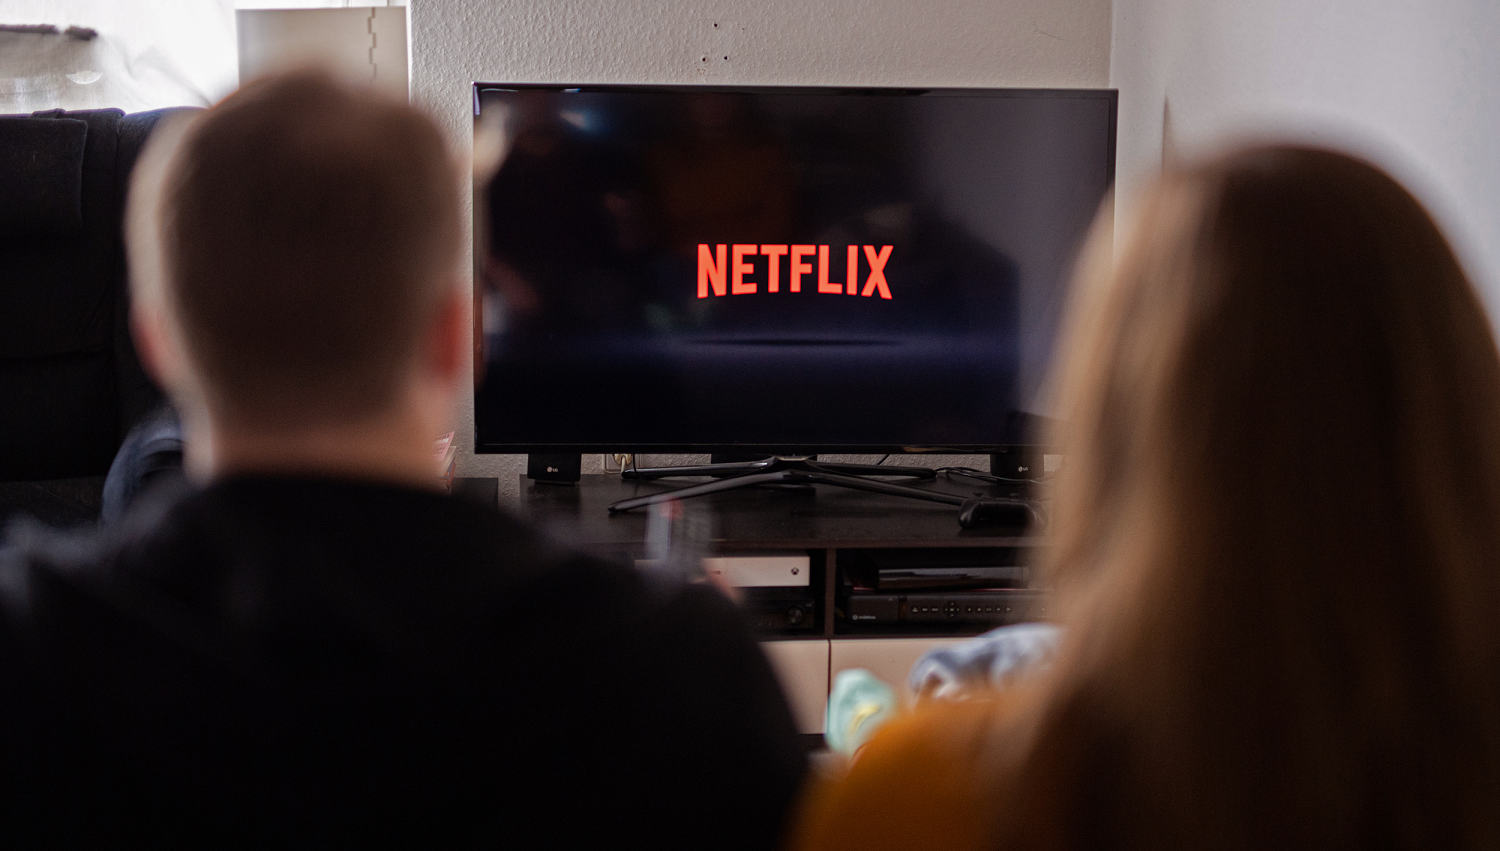 With corners of the media industry in upheaval, Netflix makes clear it's staying out of the fray